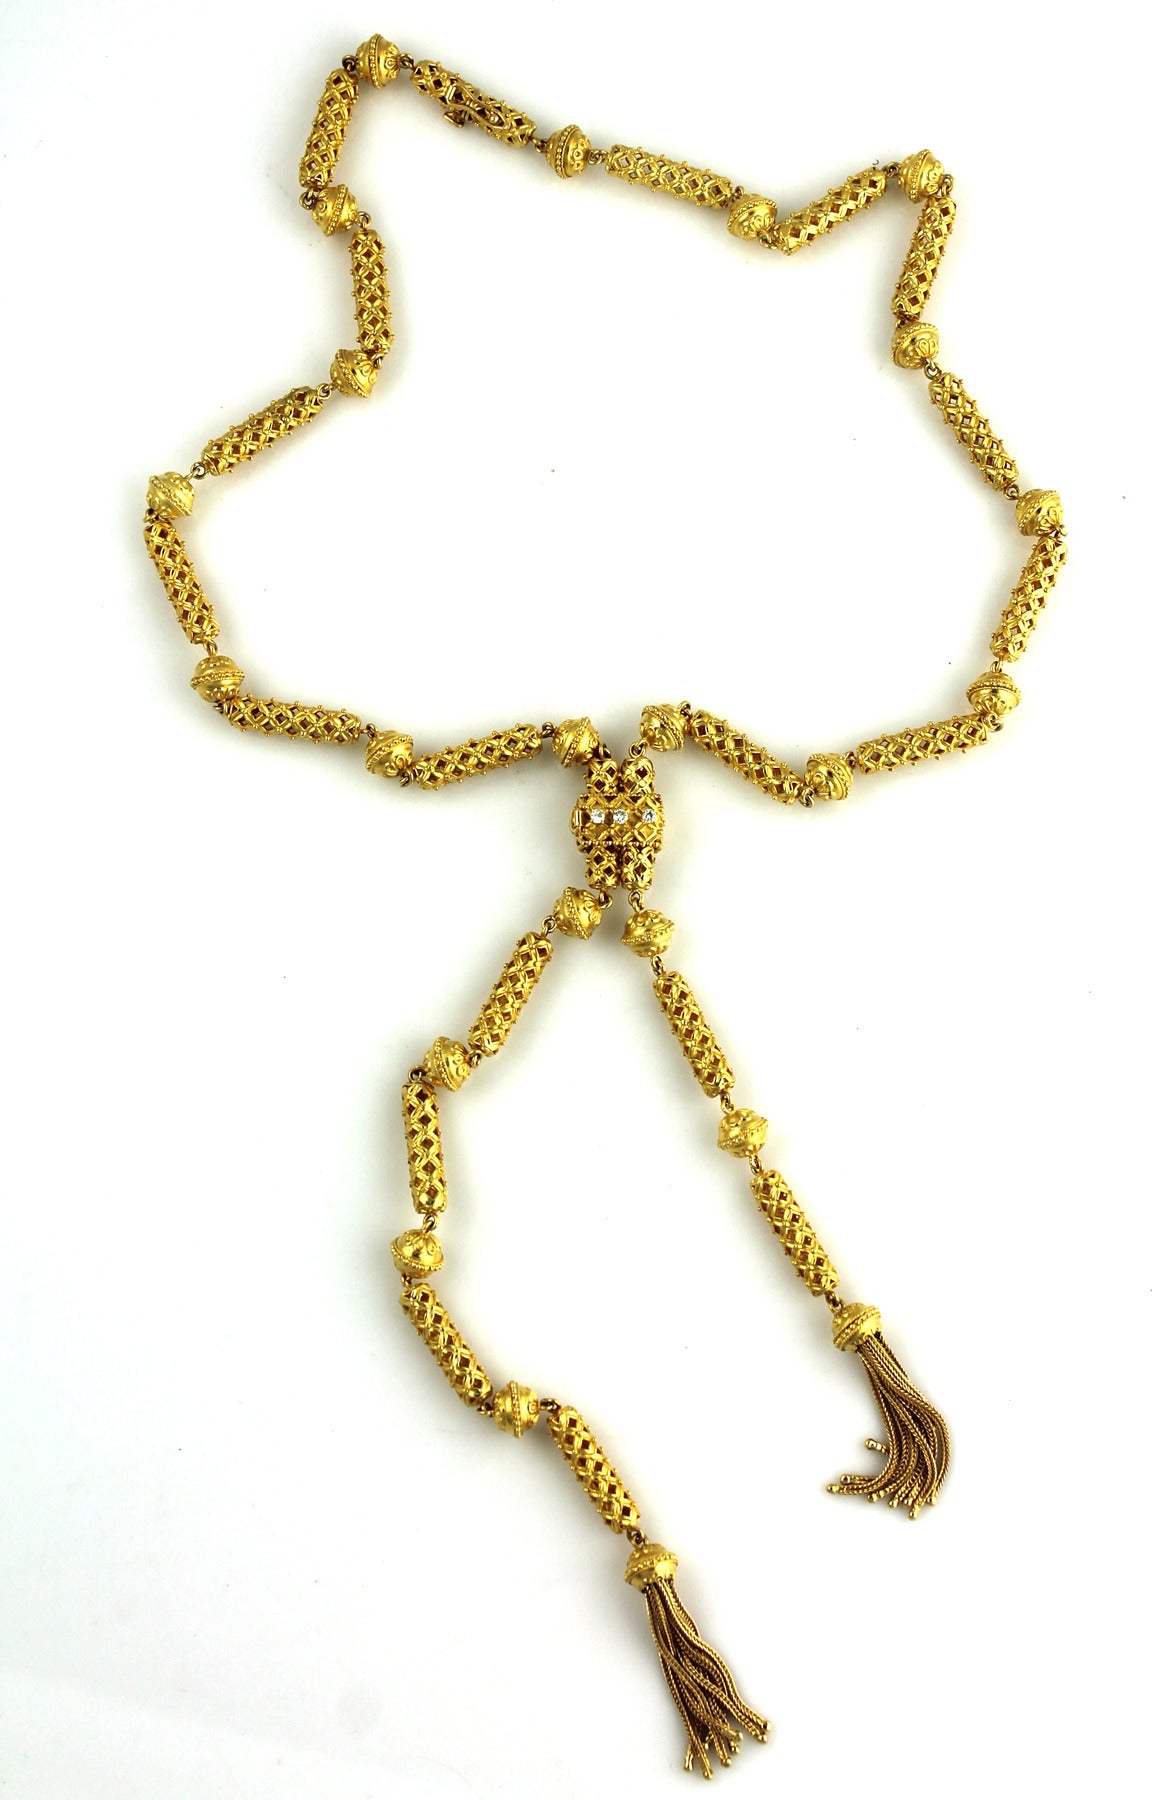 Versatile and fashionable 22 karat yellow gold Lariat necklace can be worn many different ways. The clasp is set with three diamonds, and is removable and adjustable. The textured links, tassels, and clasp gives the necklace style and flexibility. 